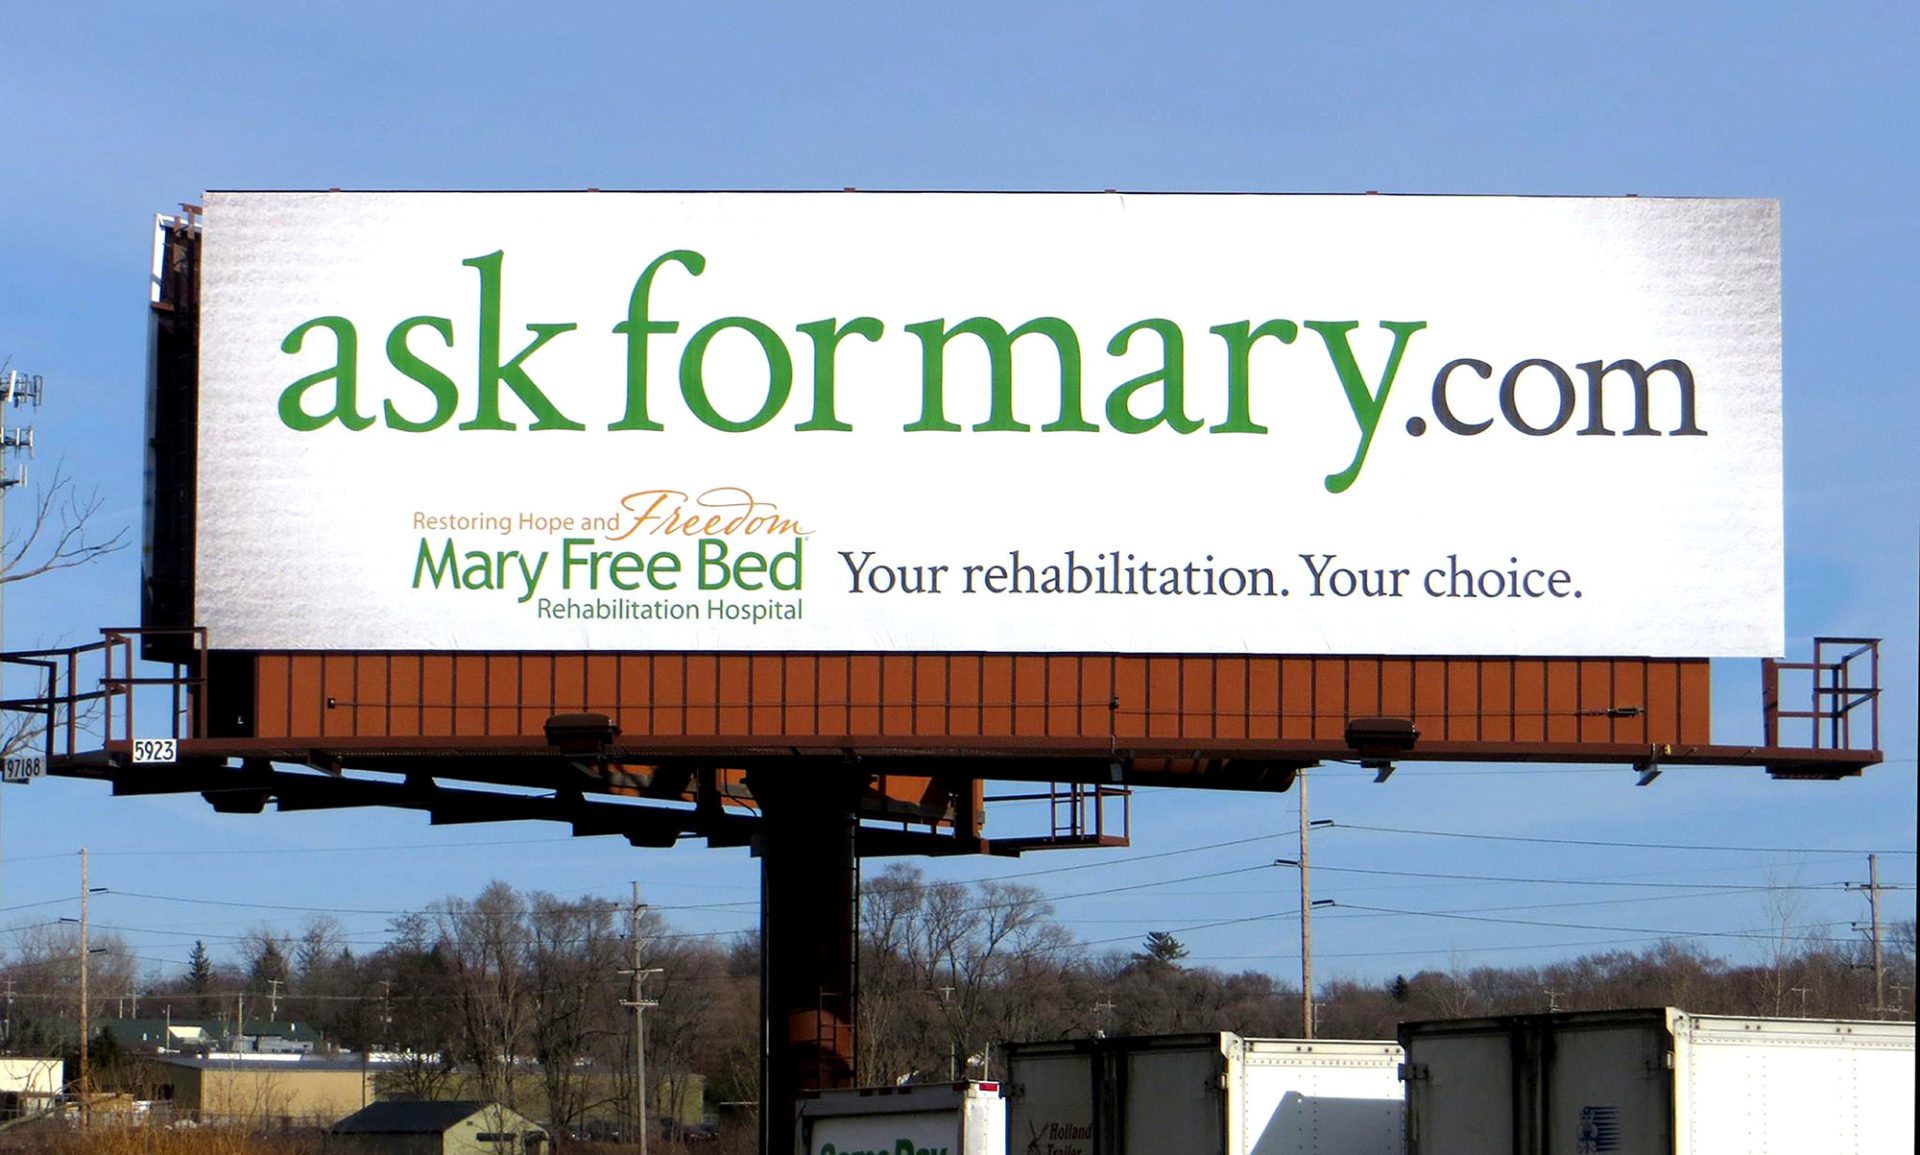 Ask for mary.com reveal out of home bulletin